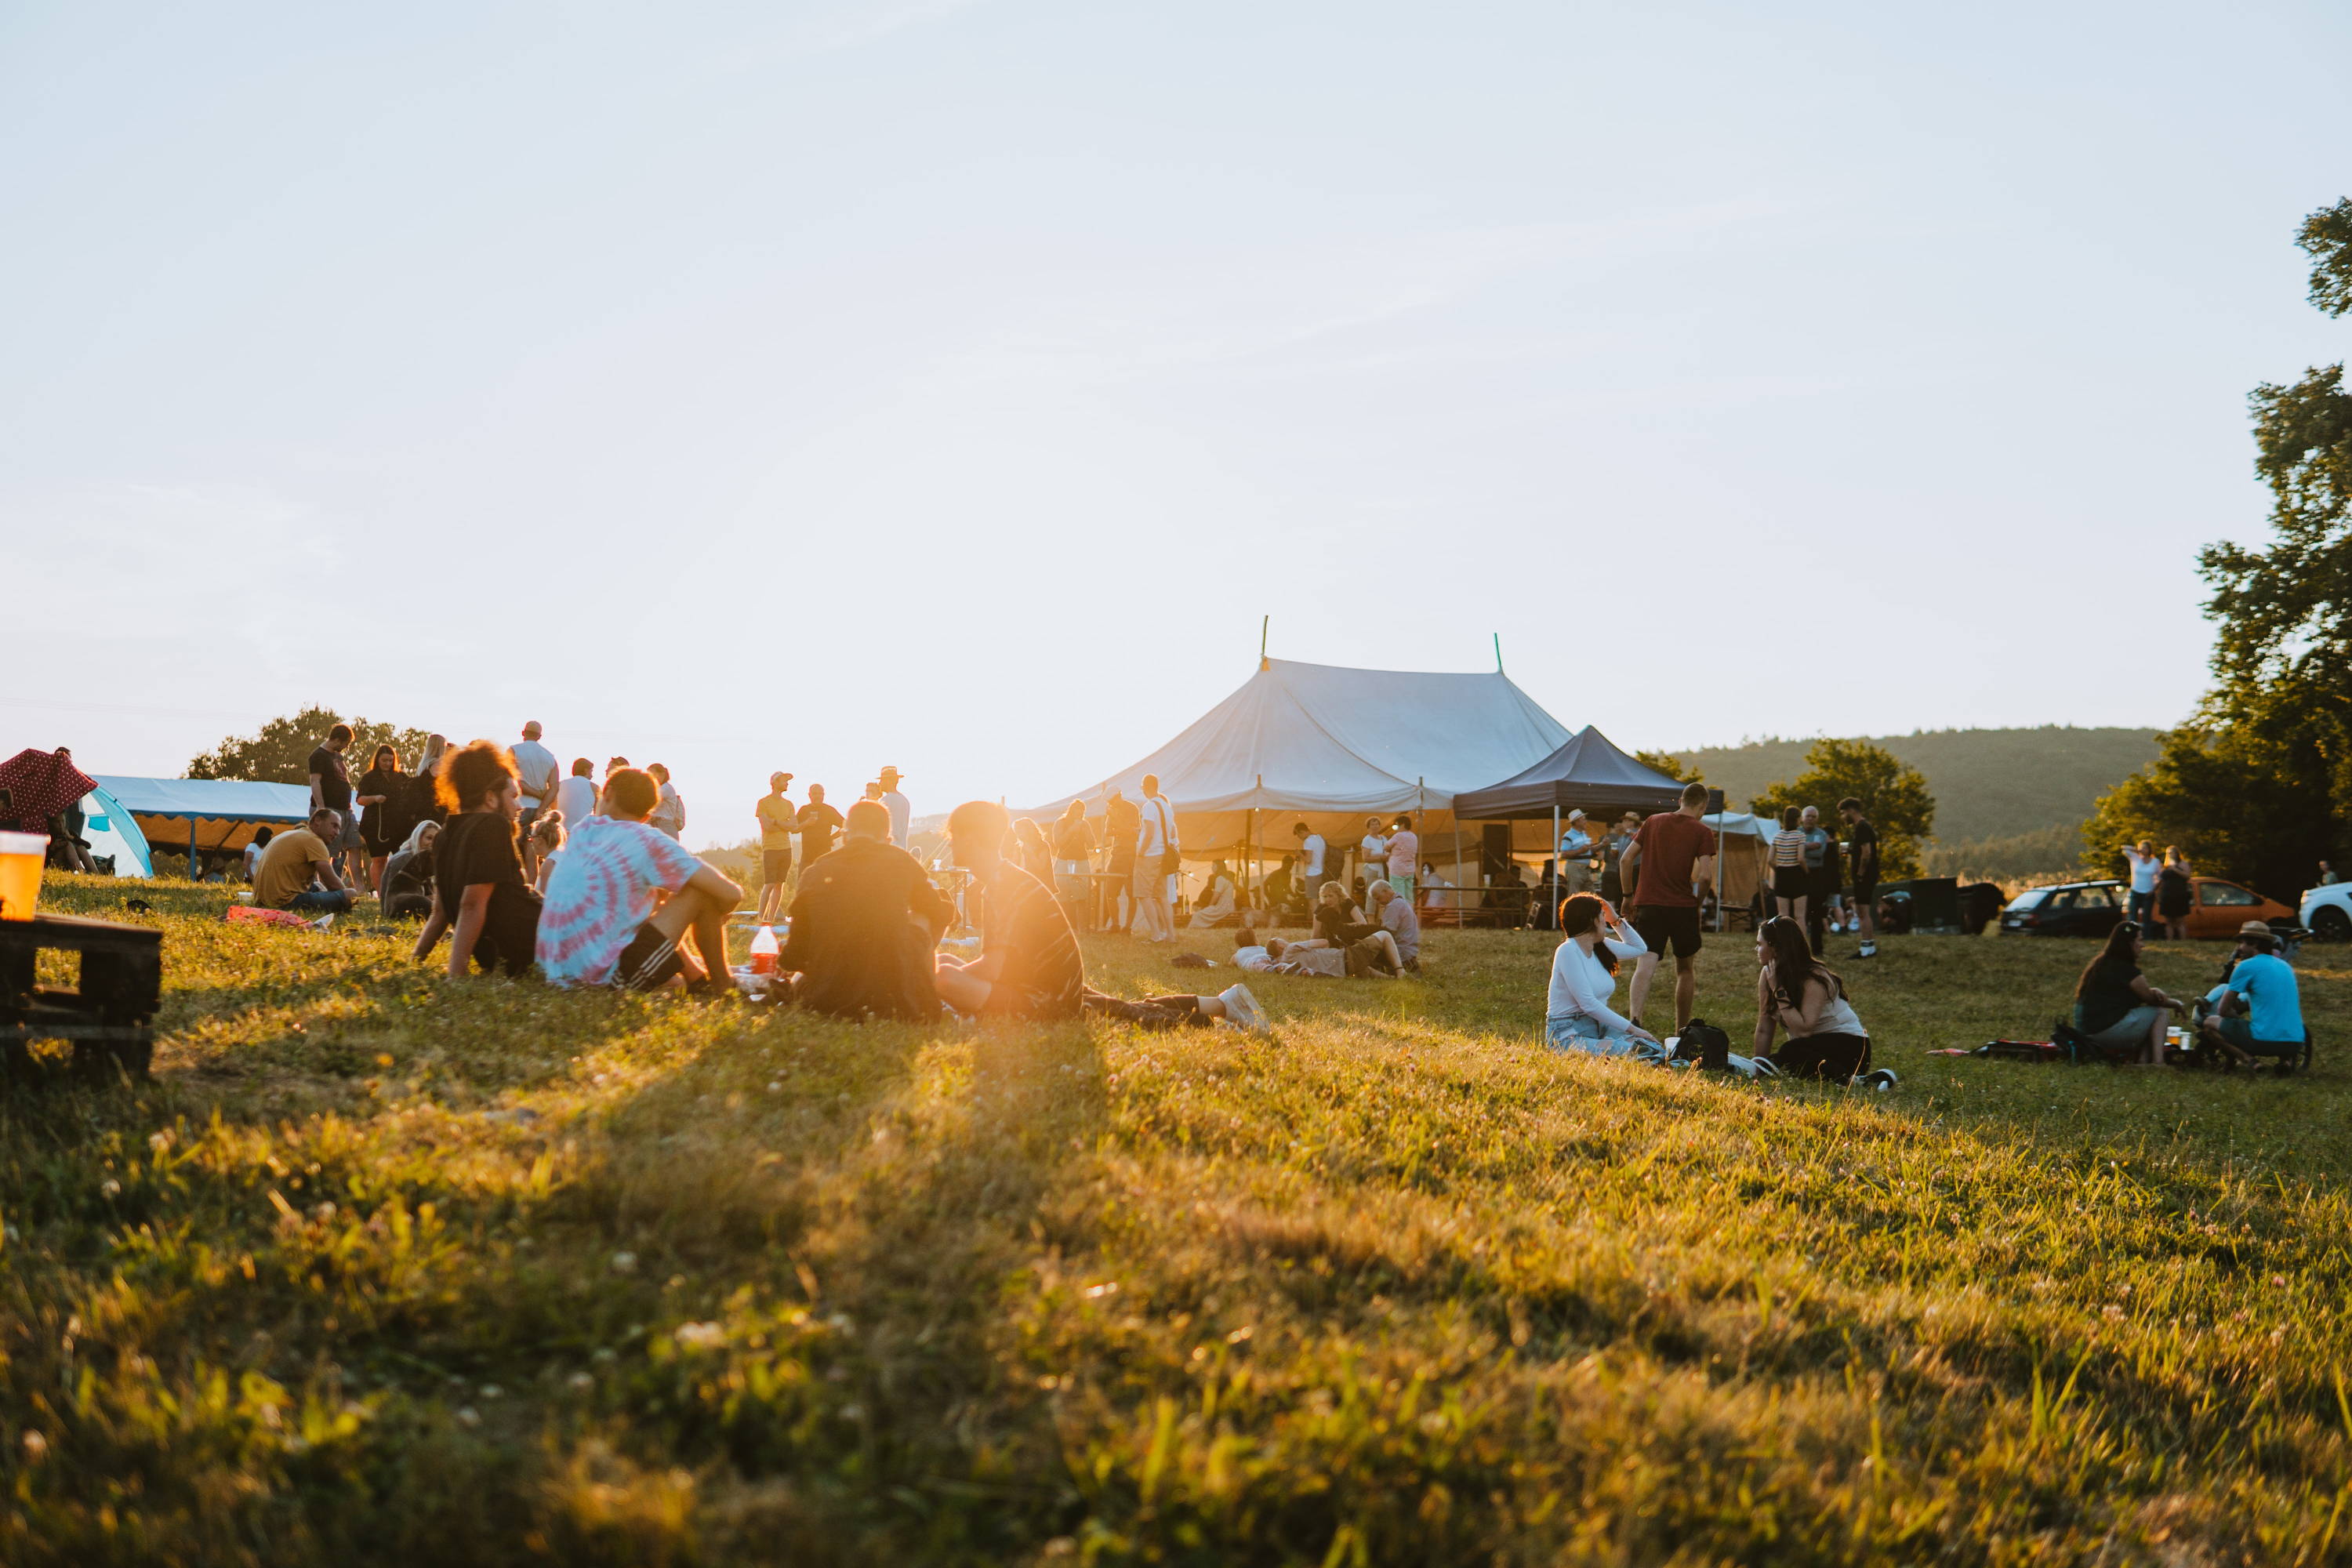 A field at sunset with festival tents and people sitting on the grass